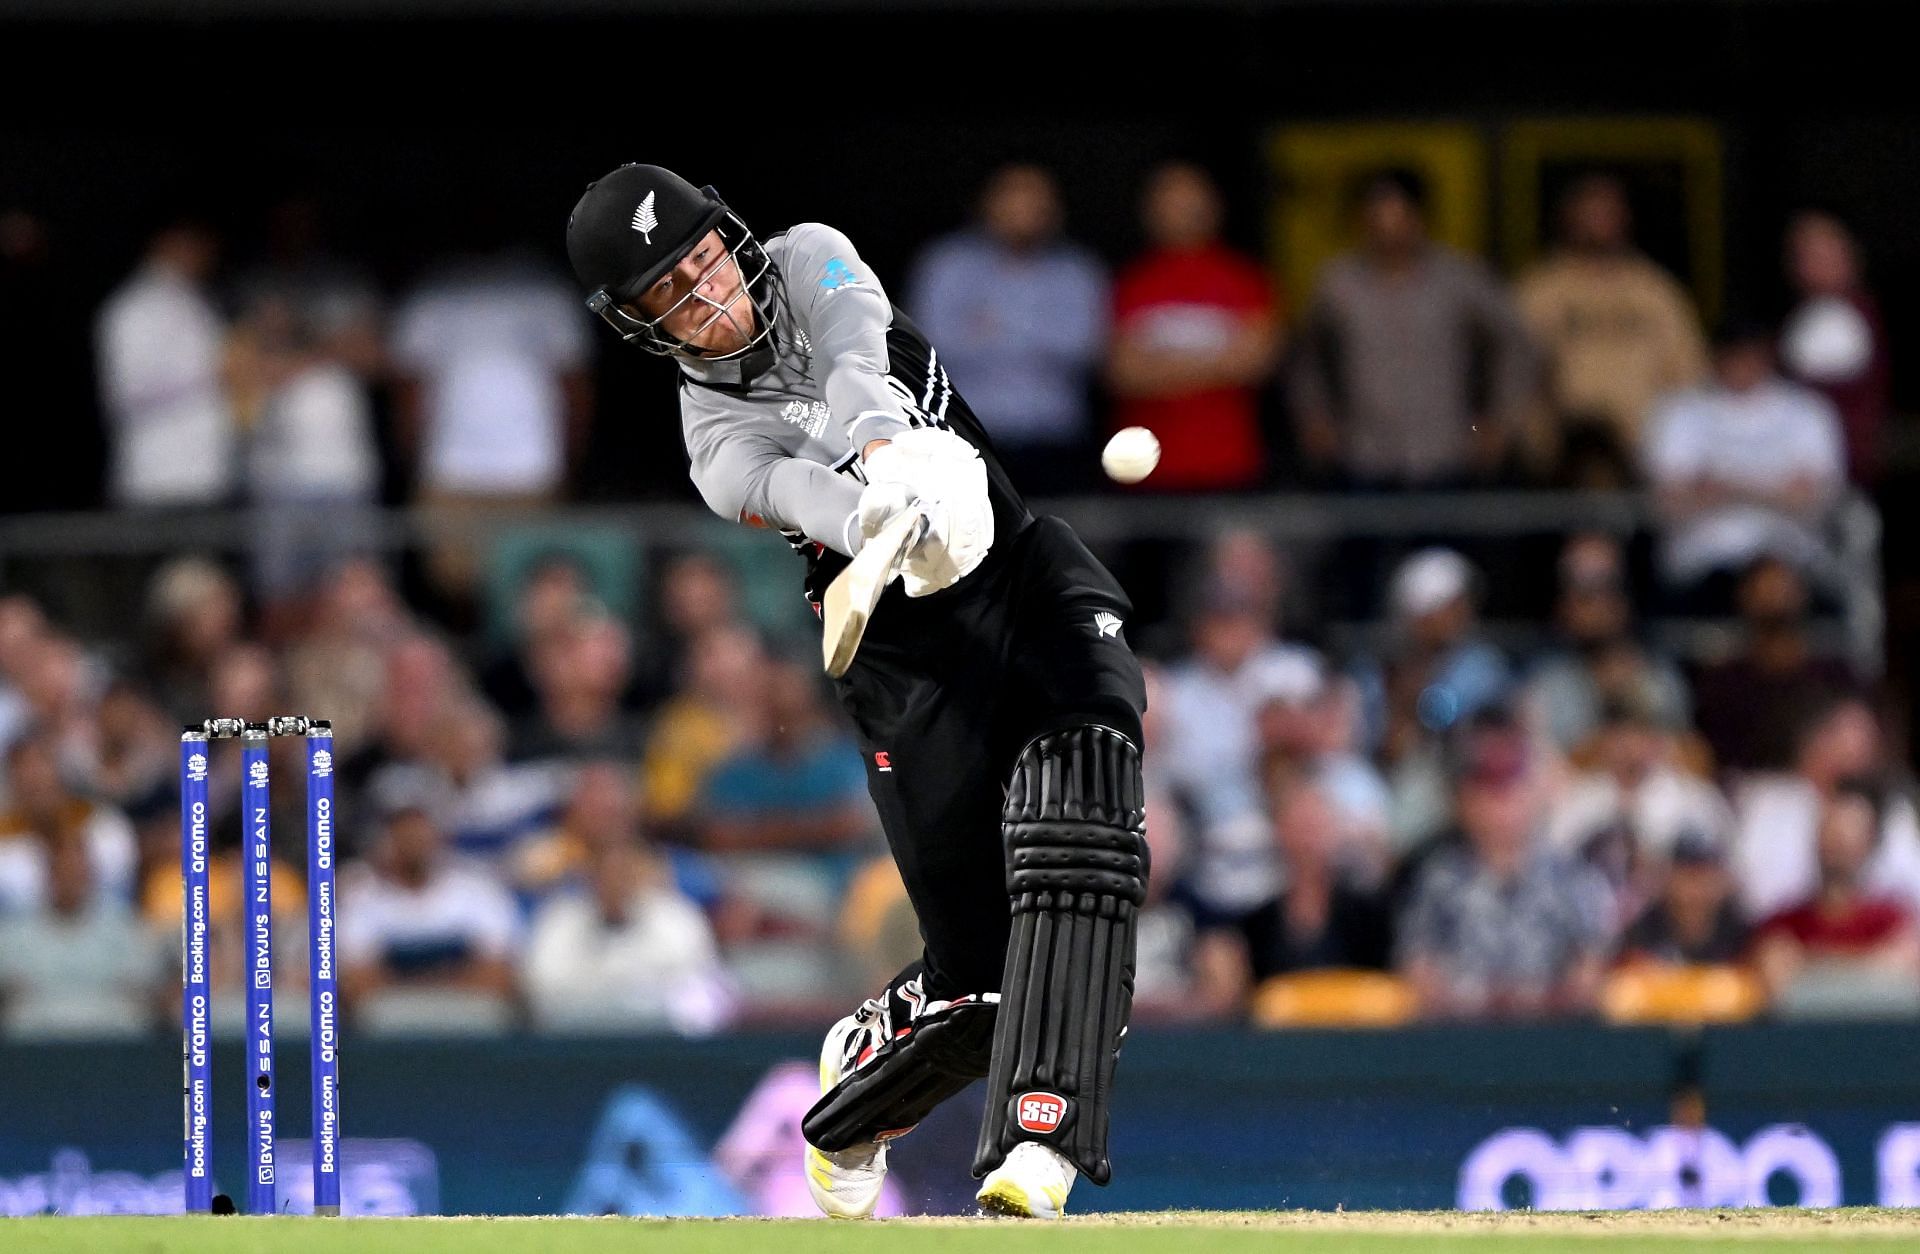 Finn Allen played a destructive knock for New Zealand against Australia in the T20 World Cup.